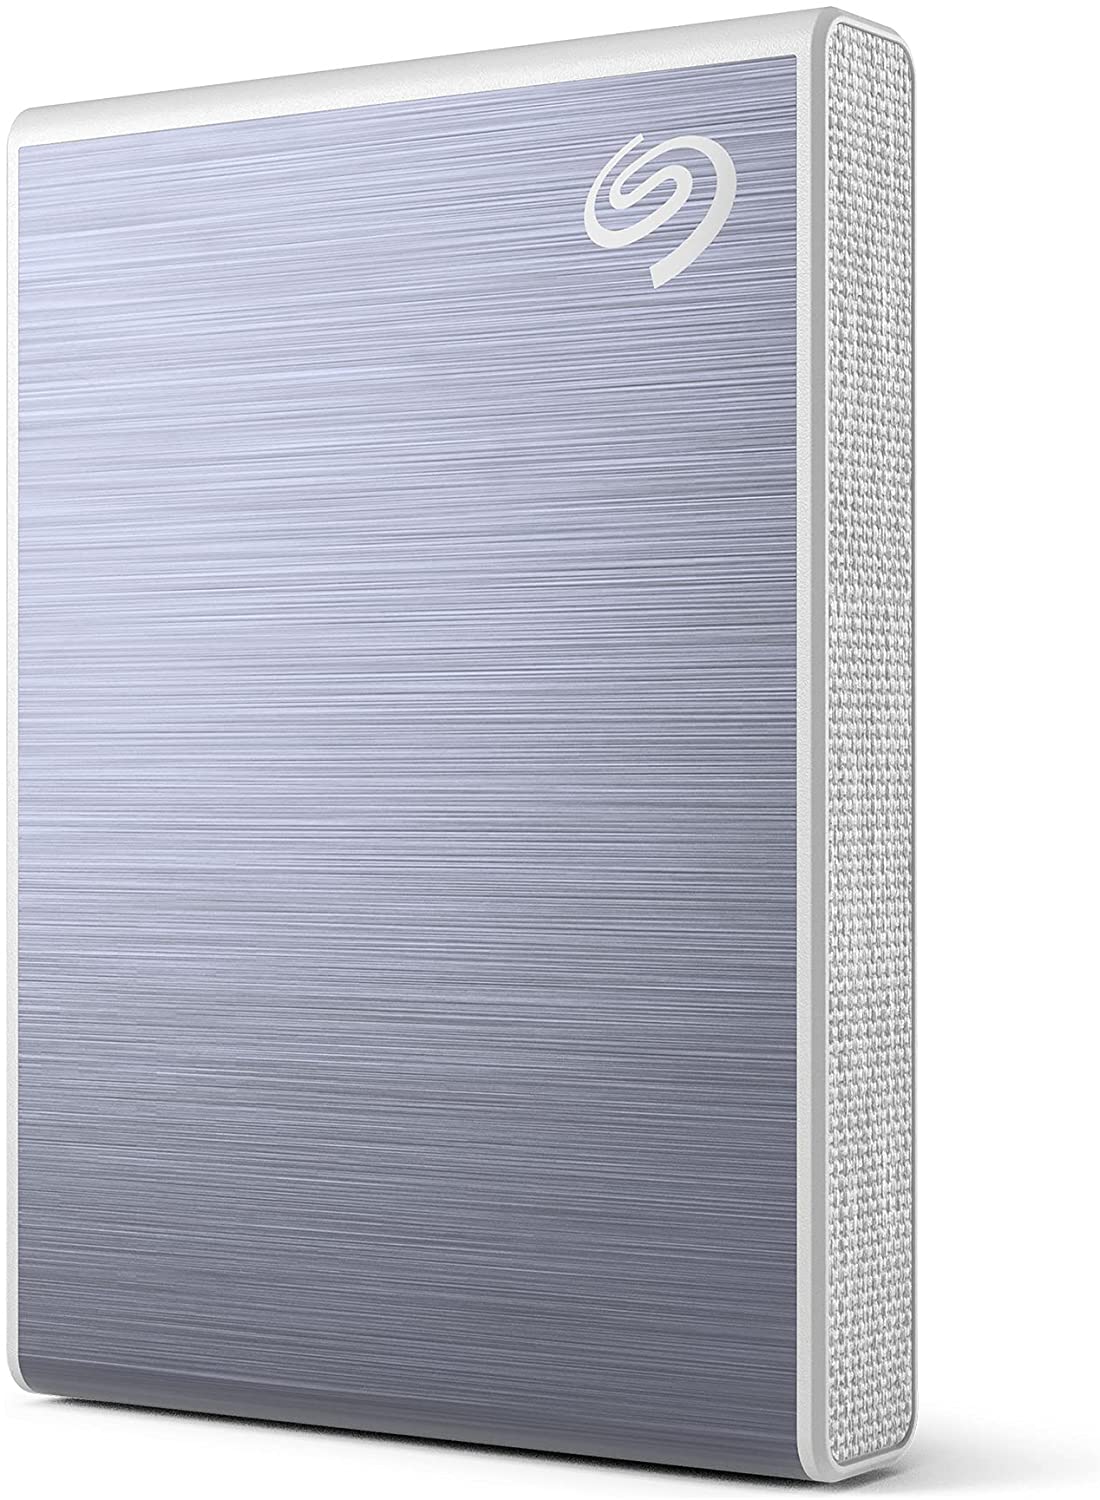 Hard disk ssd seagate one touch 2tb usb 3.2 blue